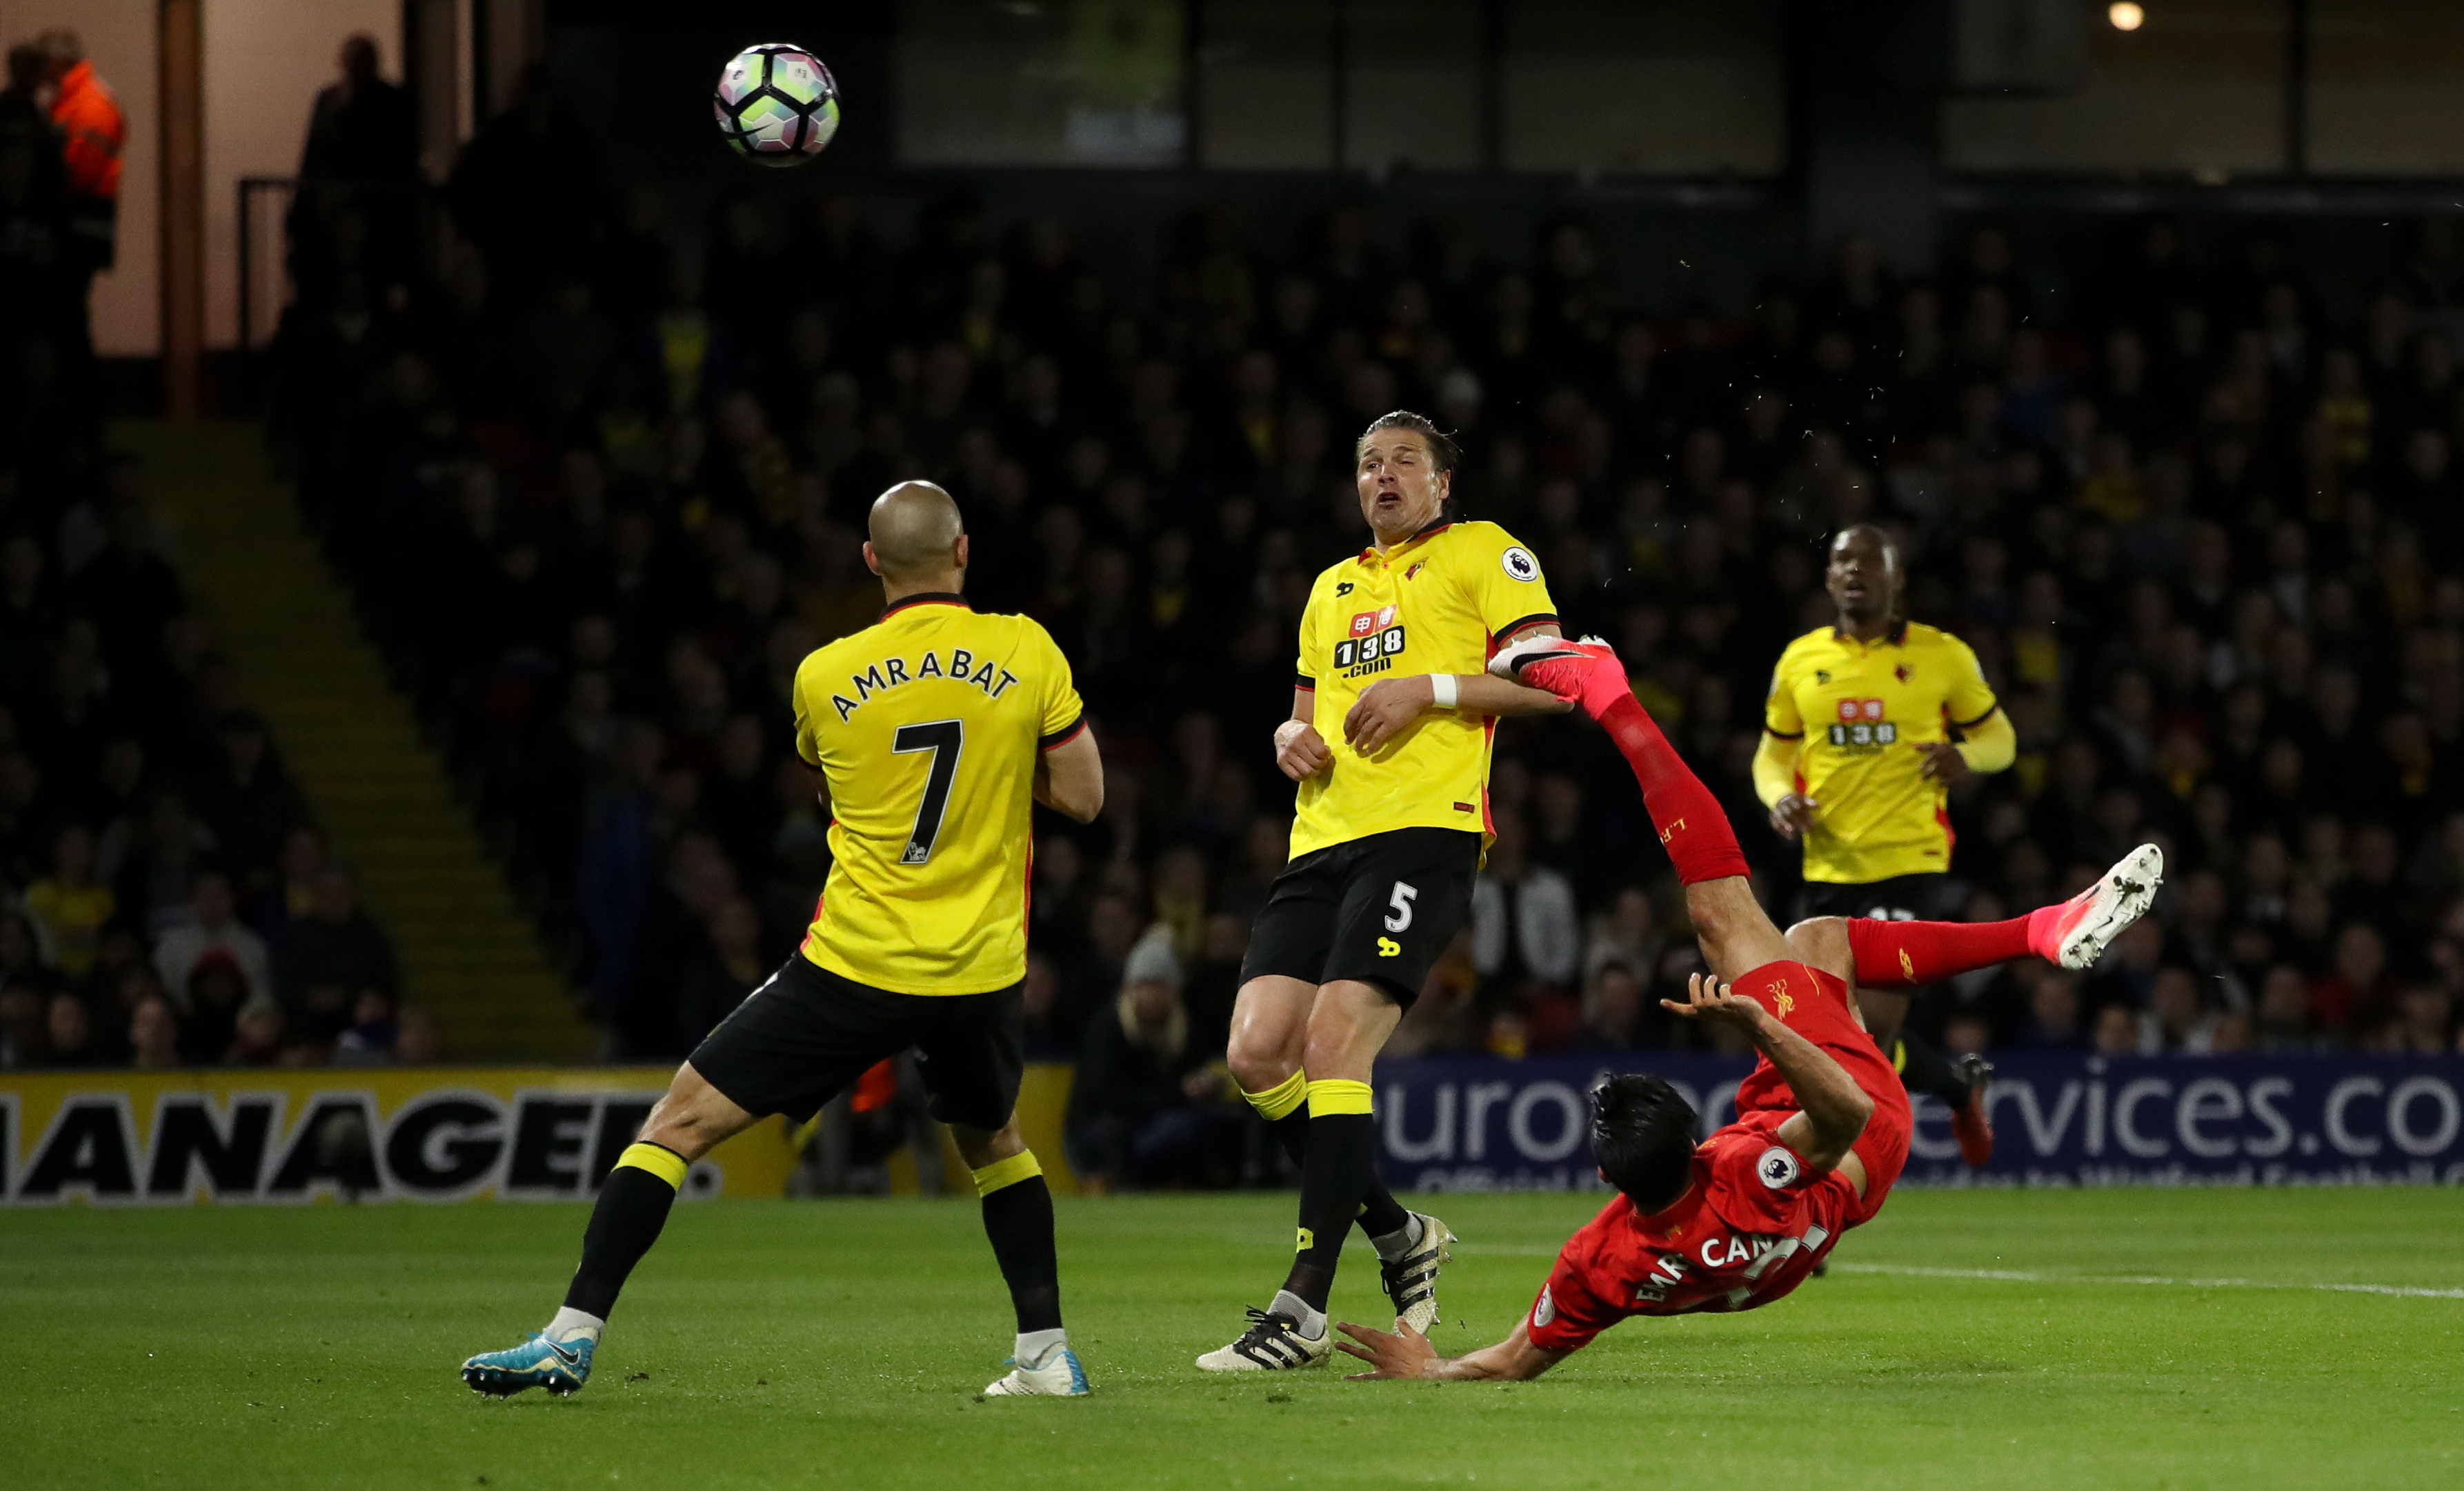 Liverpool's Emre Can scores against Watford